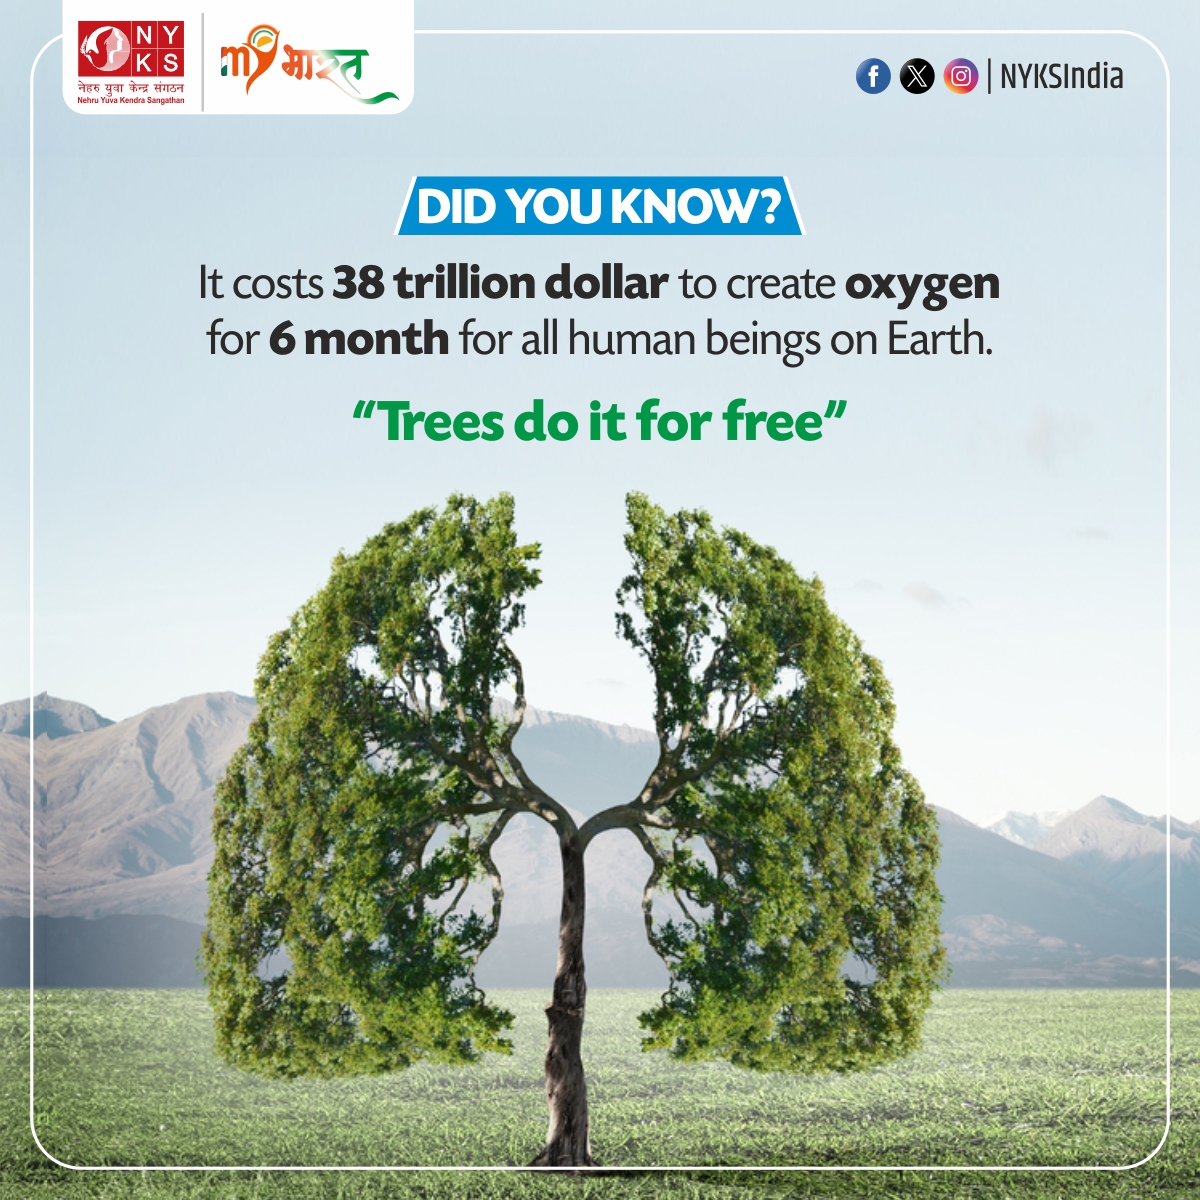 Did you know? It costs a whopping $38 trillion to create enough oxygen for 6 months for everyone on Earth. Luckily, trees do it for free! 🌳💨 Let's value and preserve our natural air purifiers. #NatureFact #TreesMatter #SaveOurPlanet